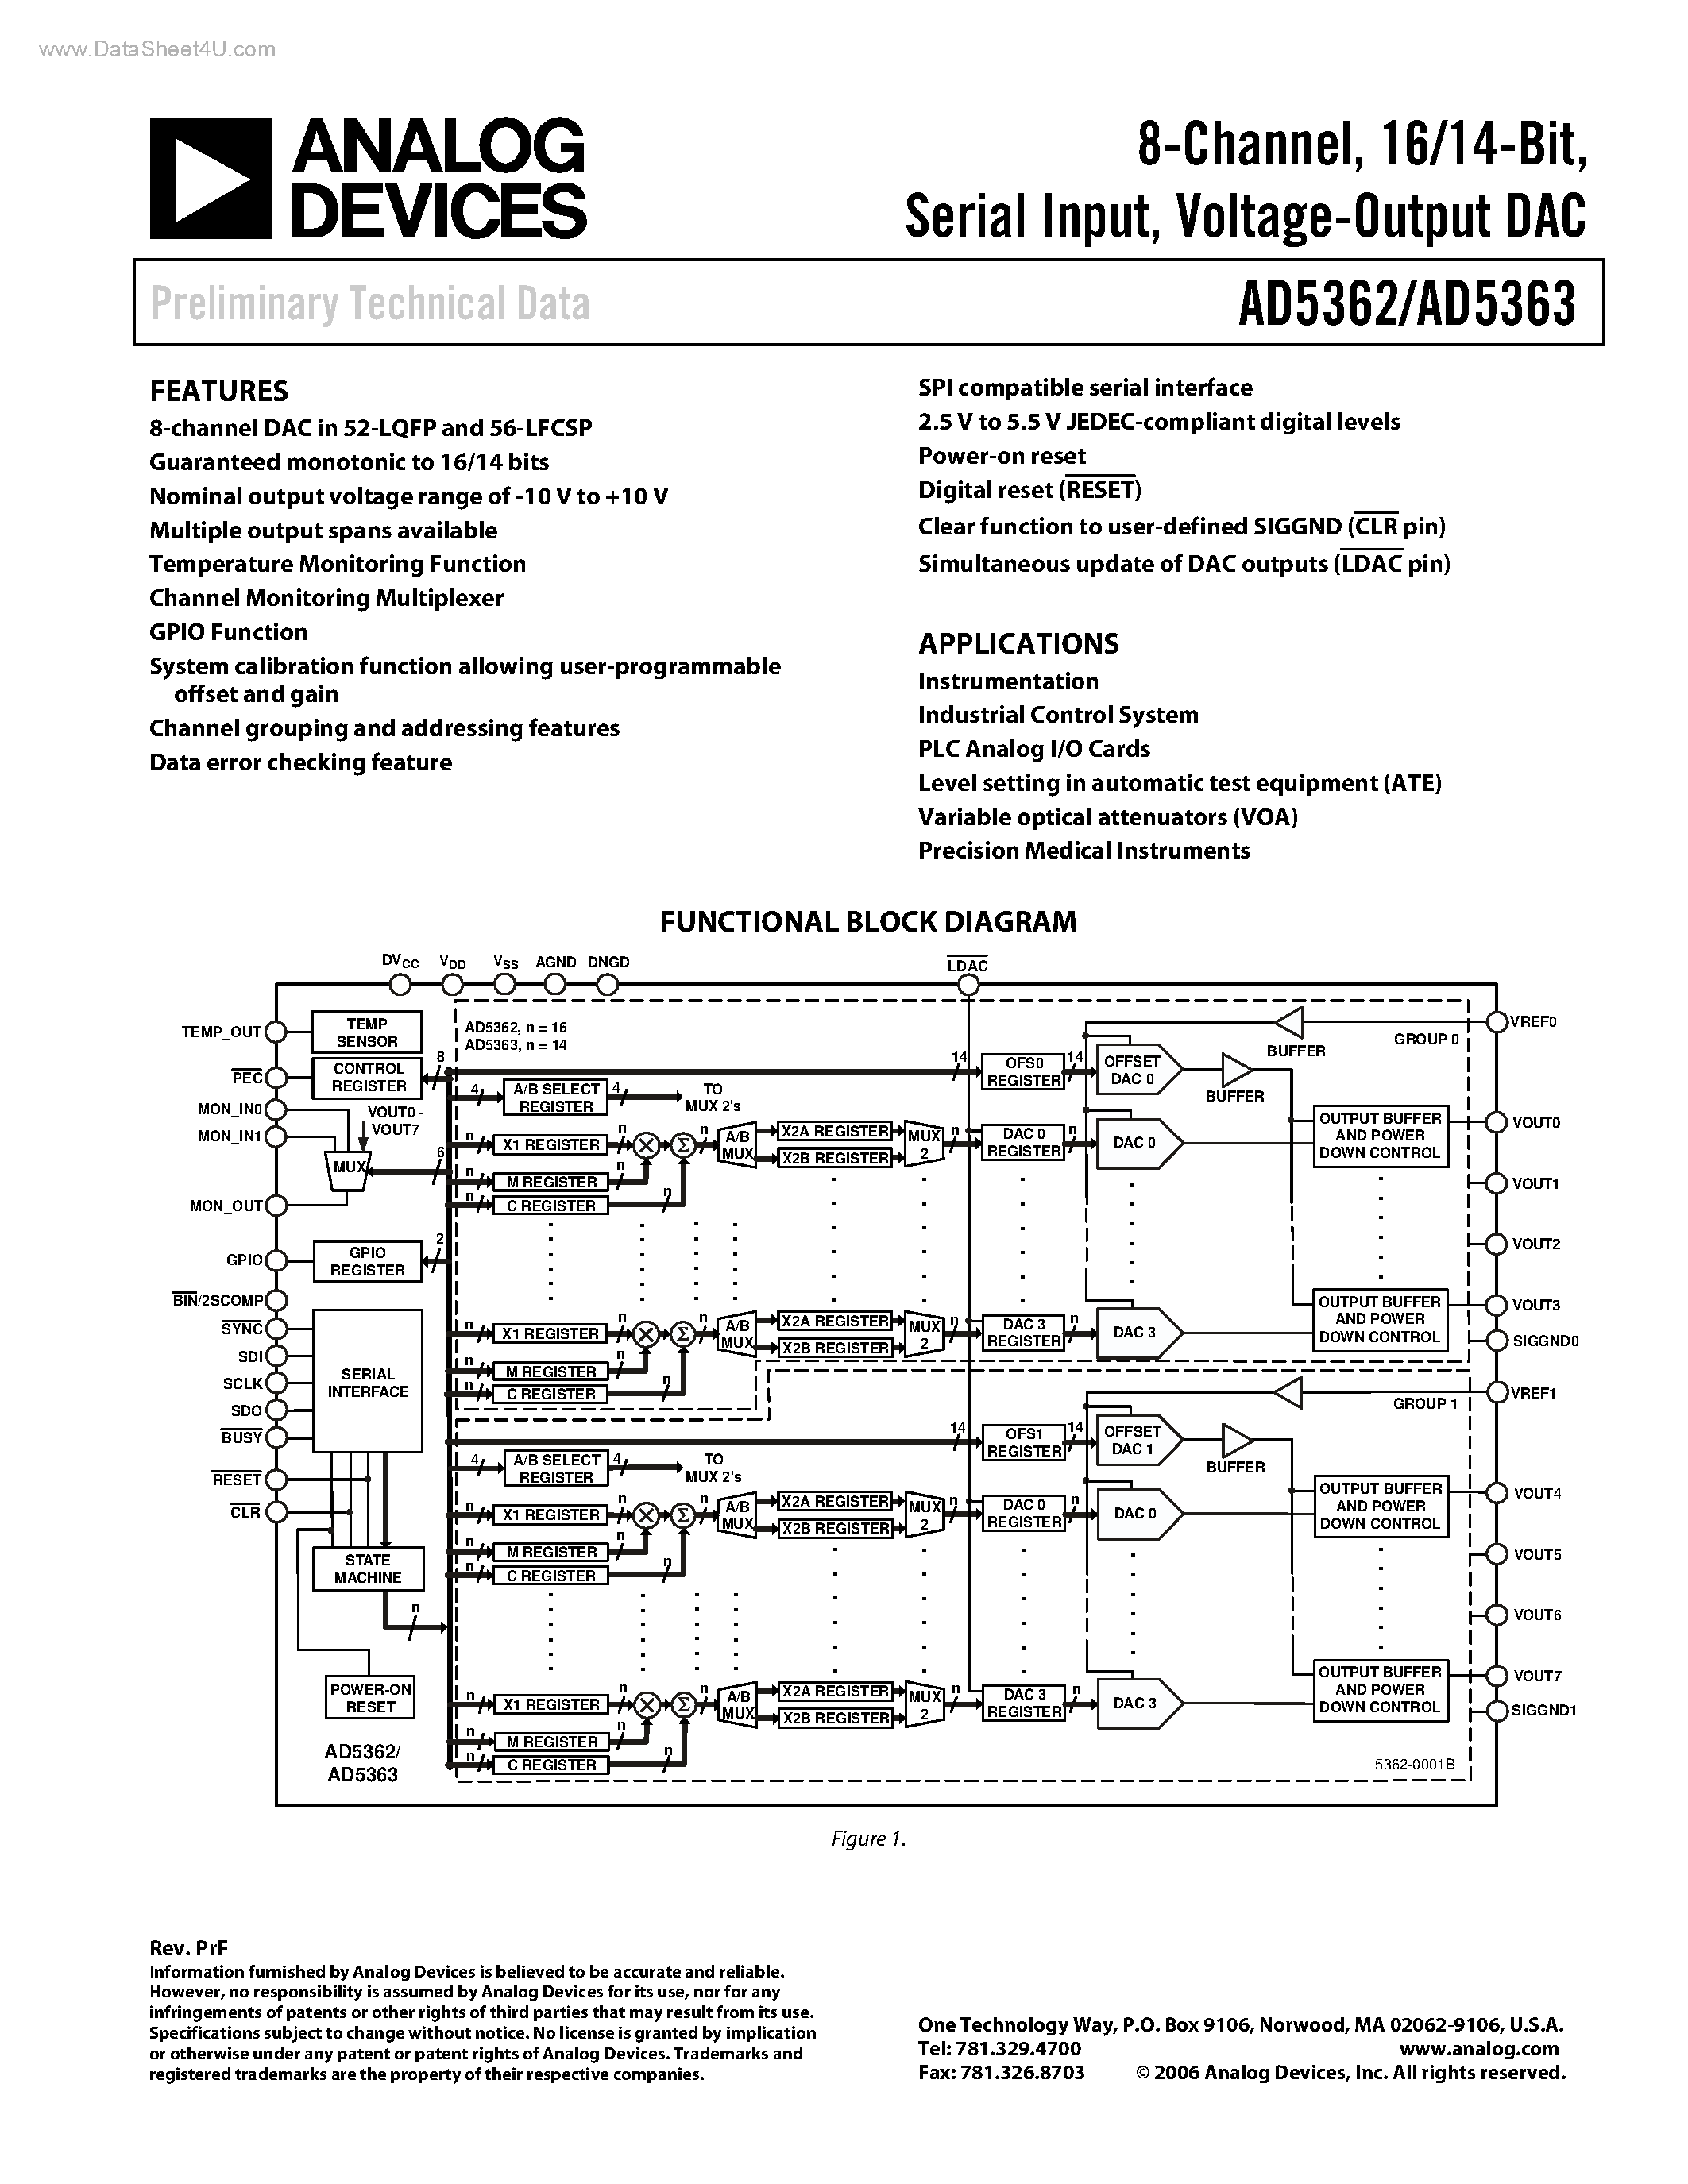 Datasheet AD5362 - (AD5362 / AD5363) Voltage-Output DAC page 1